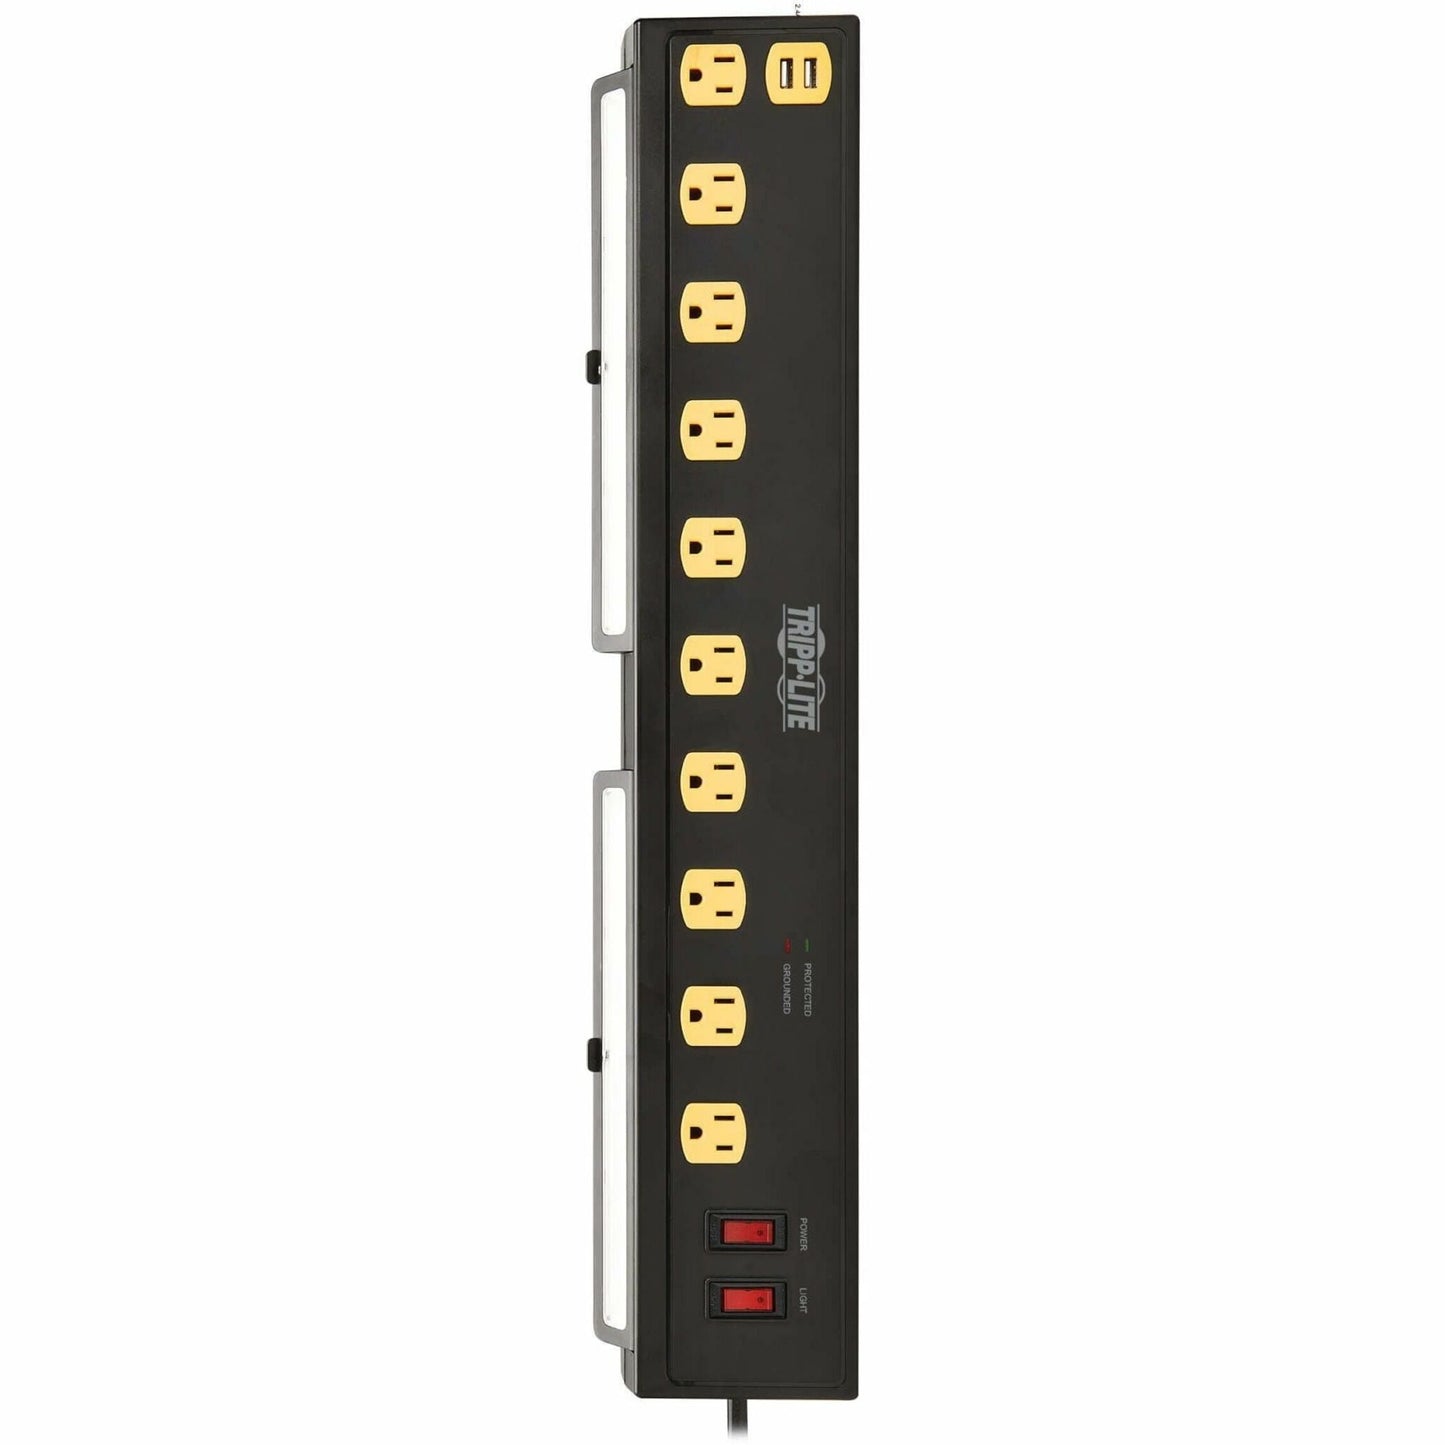 Tripp Lite Protect It! 10-Outlet Surge Protector with Swivel Light Bars - 5-15R Outlets 2 USB Ports 10 ft. (3 m) Cord 4500 Joules Black